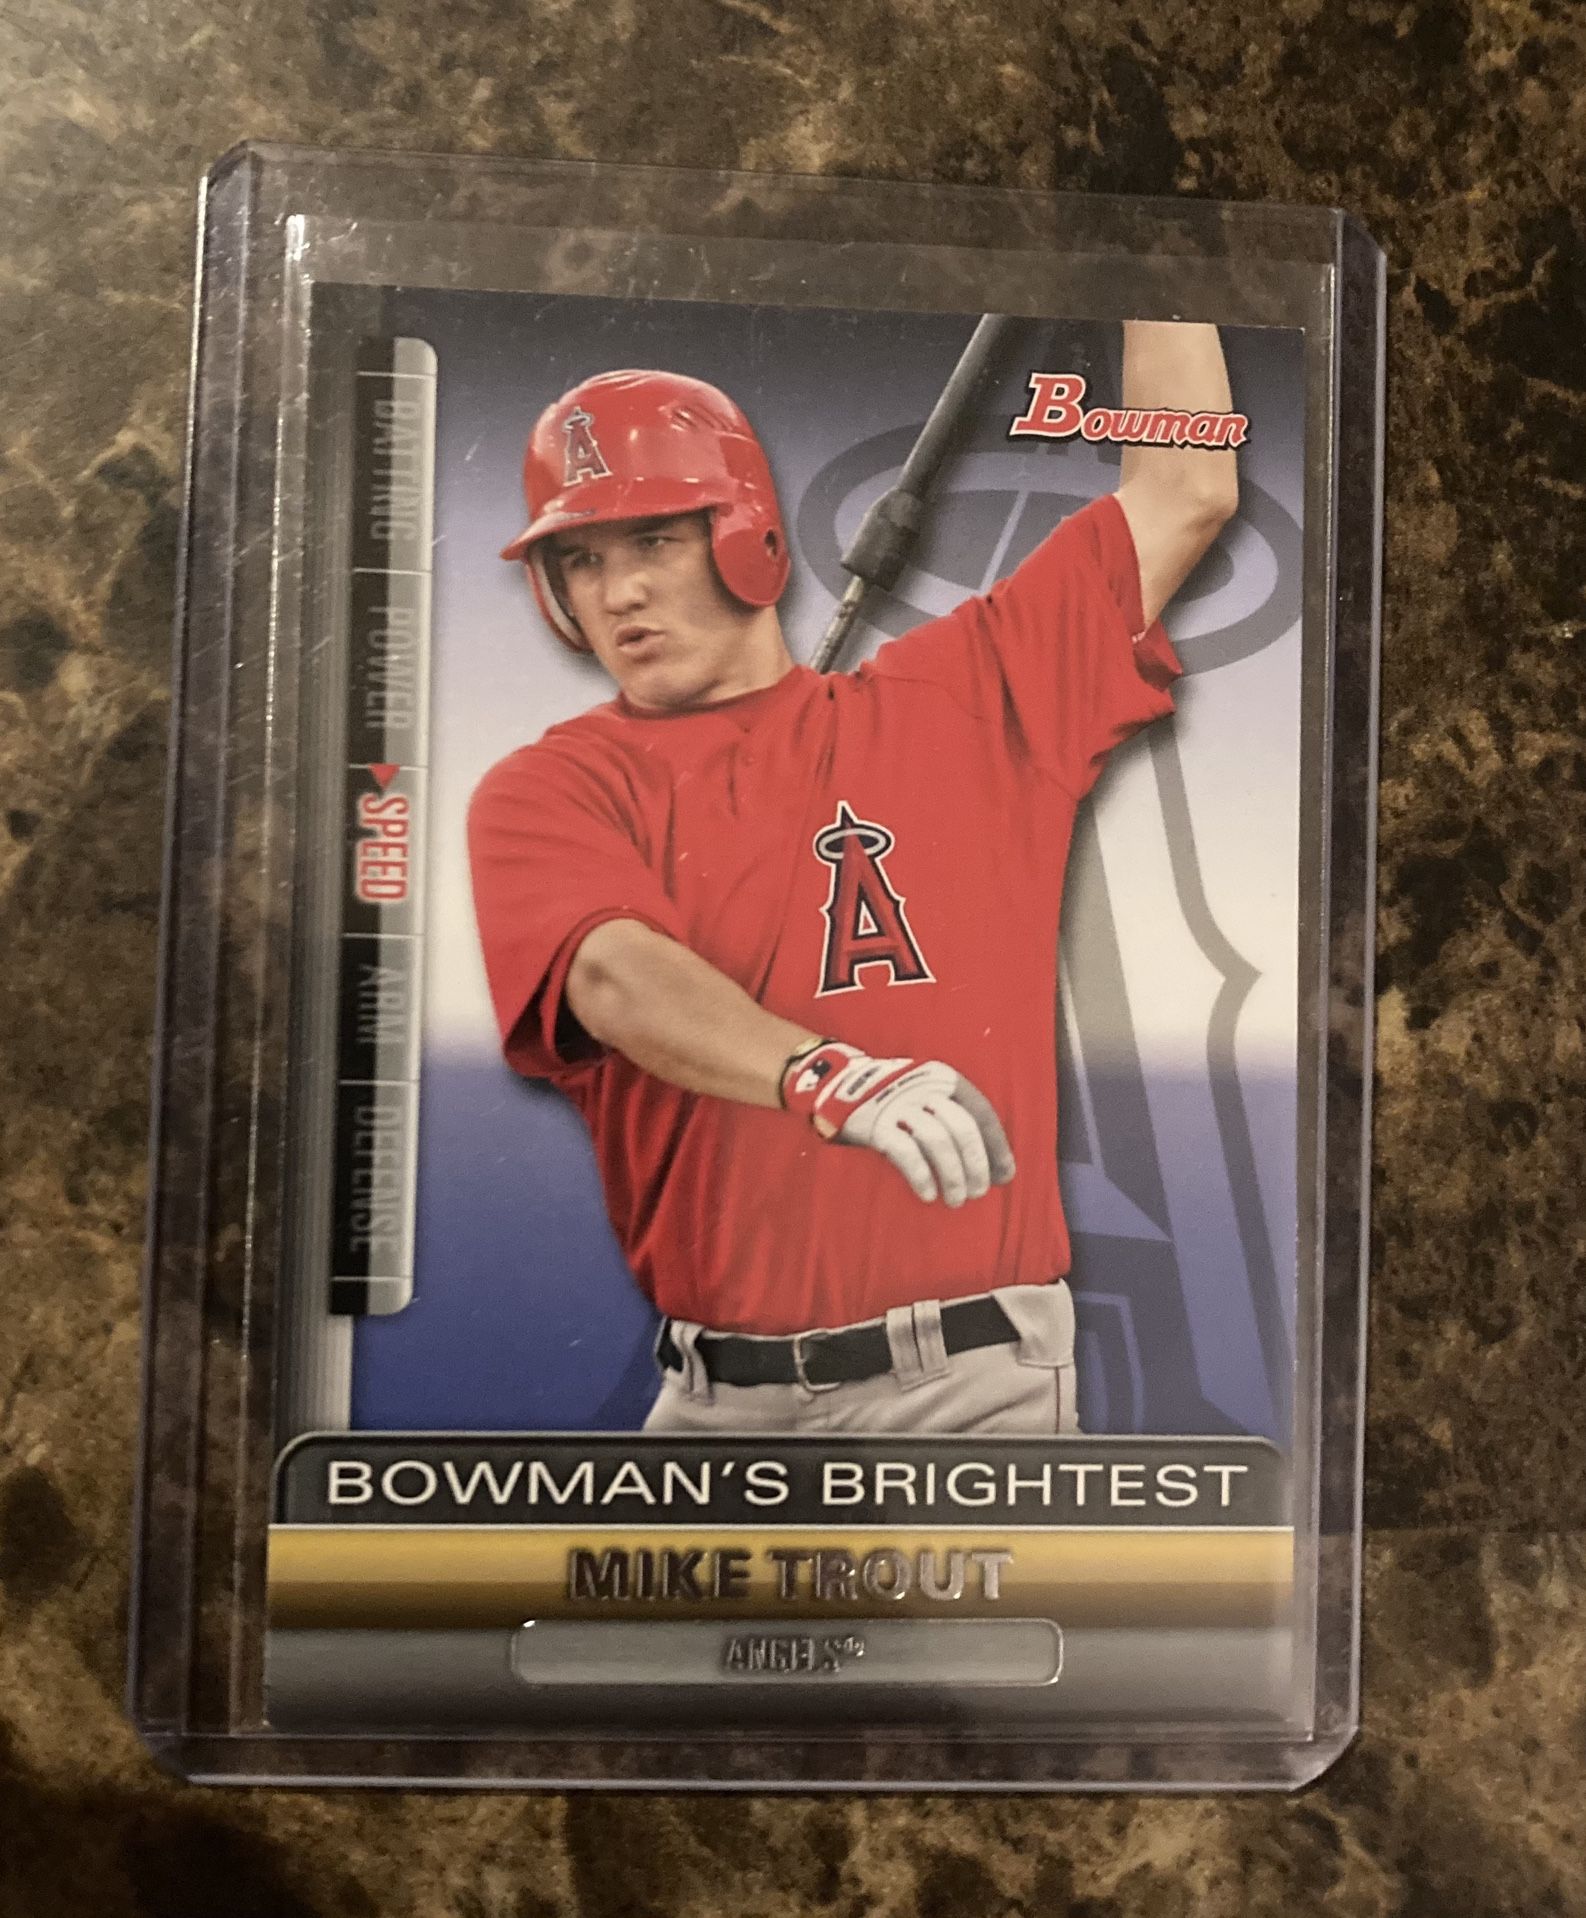 Mike Trout Bowman 2011 Bowman's Brightest rookie card . Really